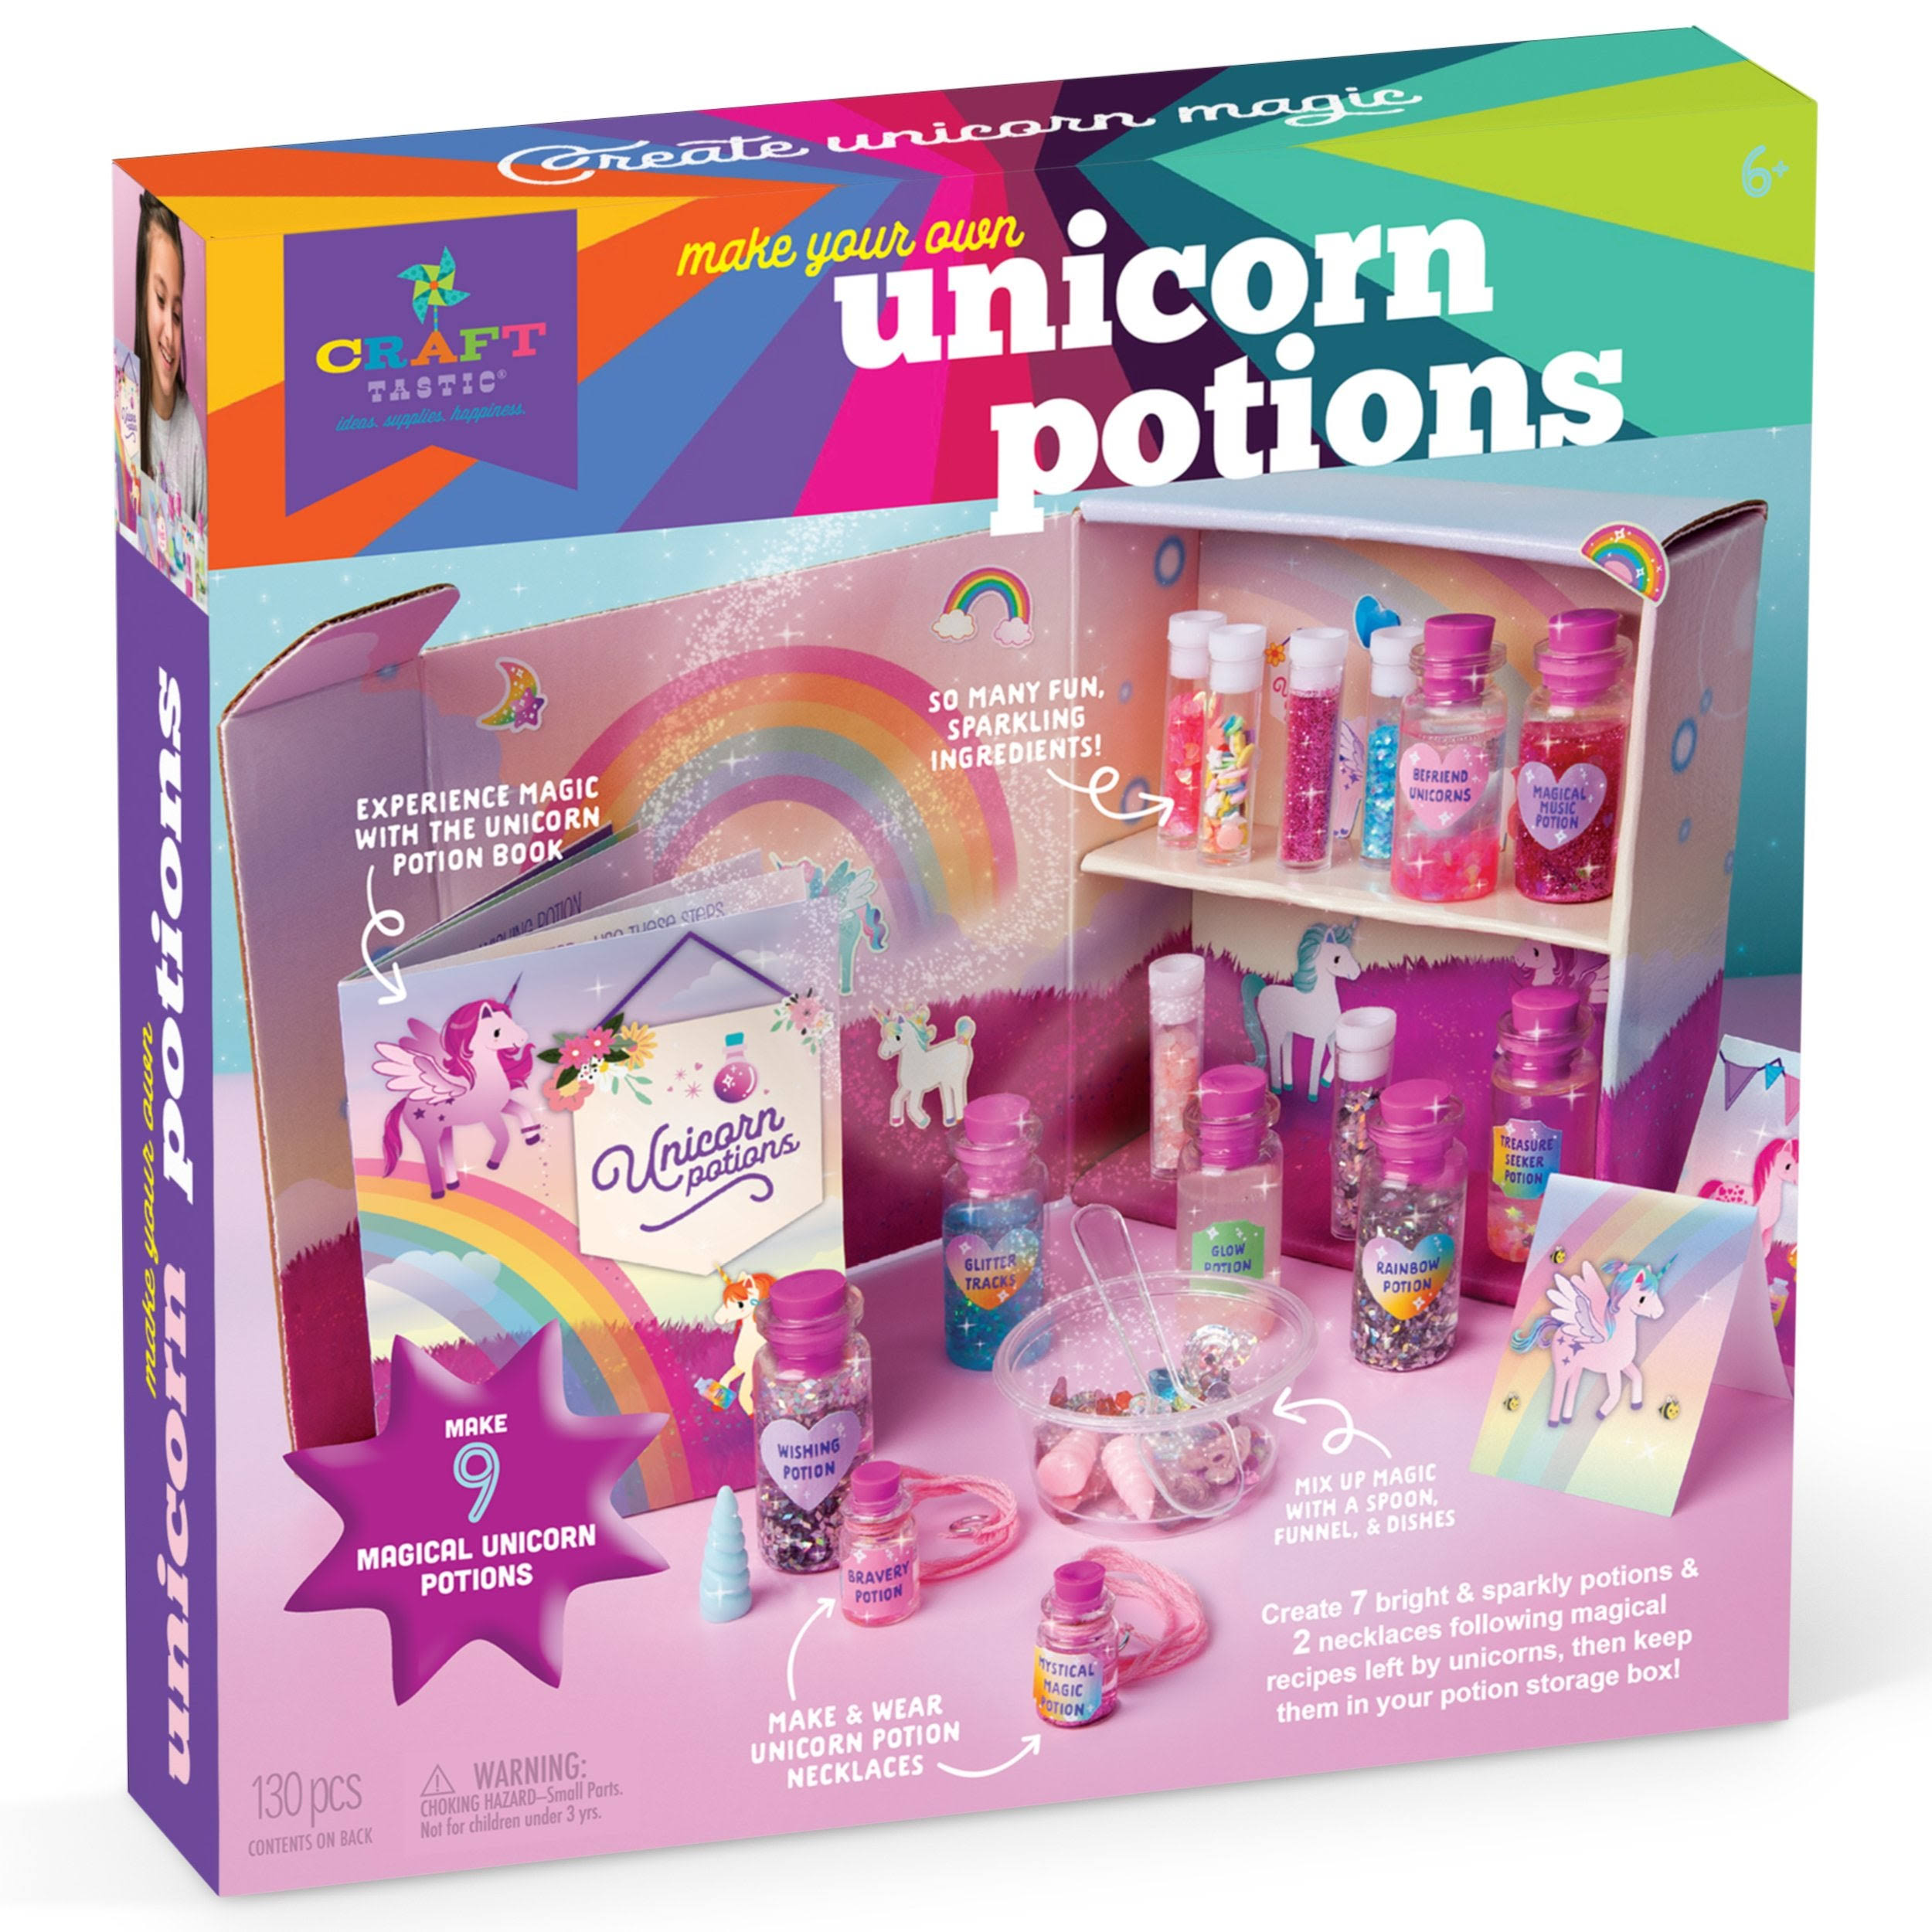 Craft Tastic DIY Unicorn Potions Craft Kit Includes Unicorn Potion Book with Magical Recipies